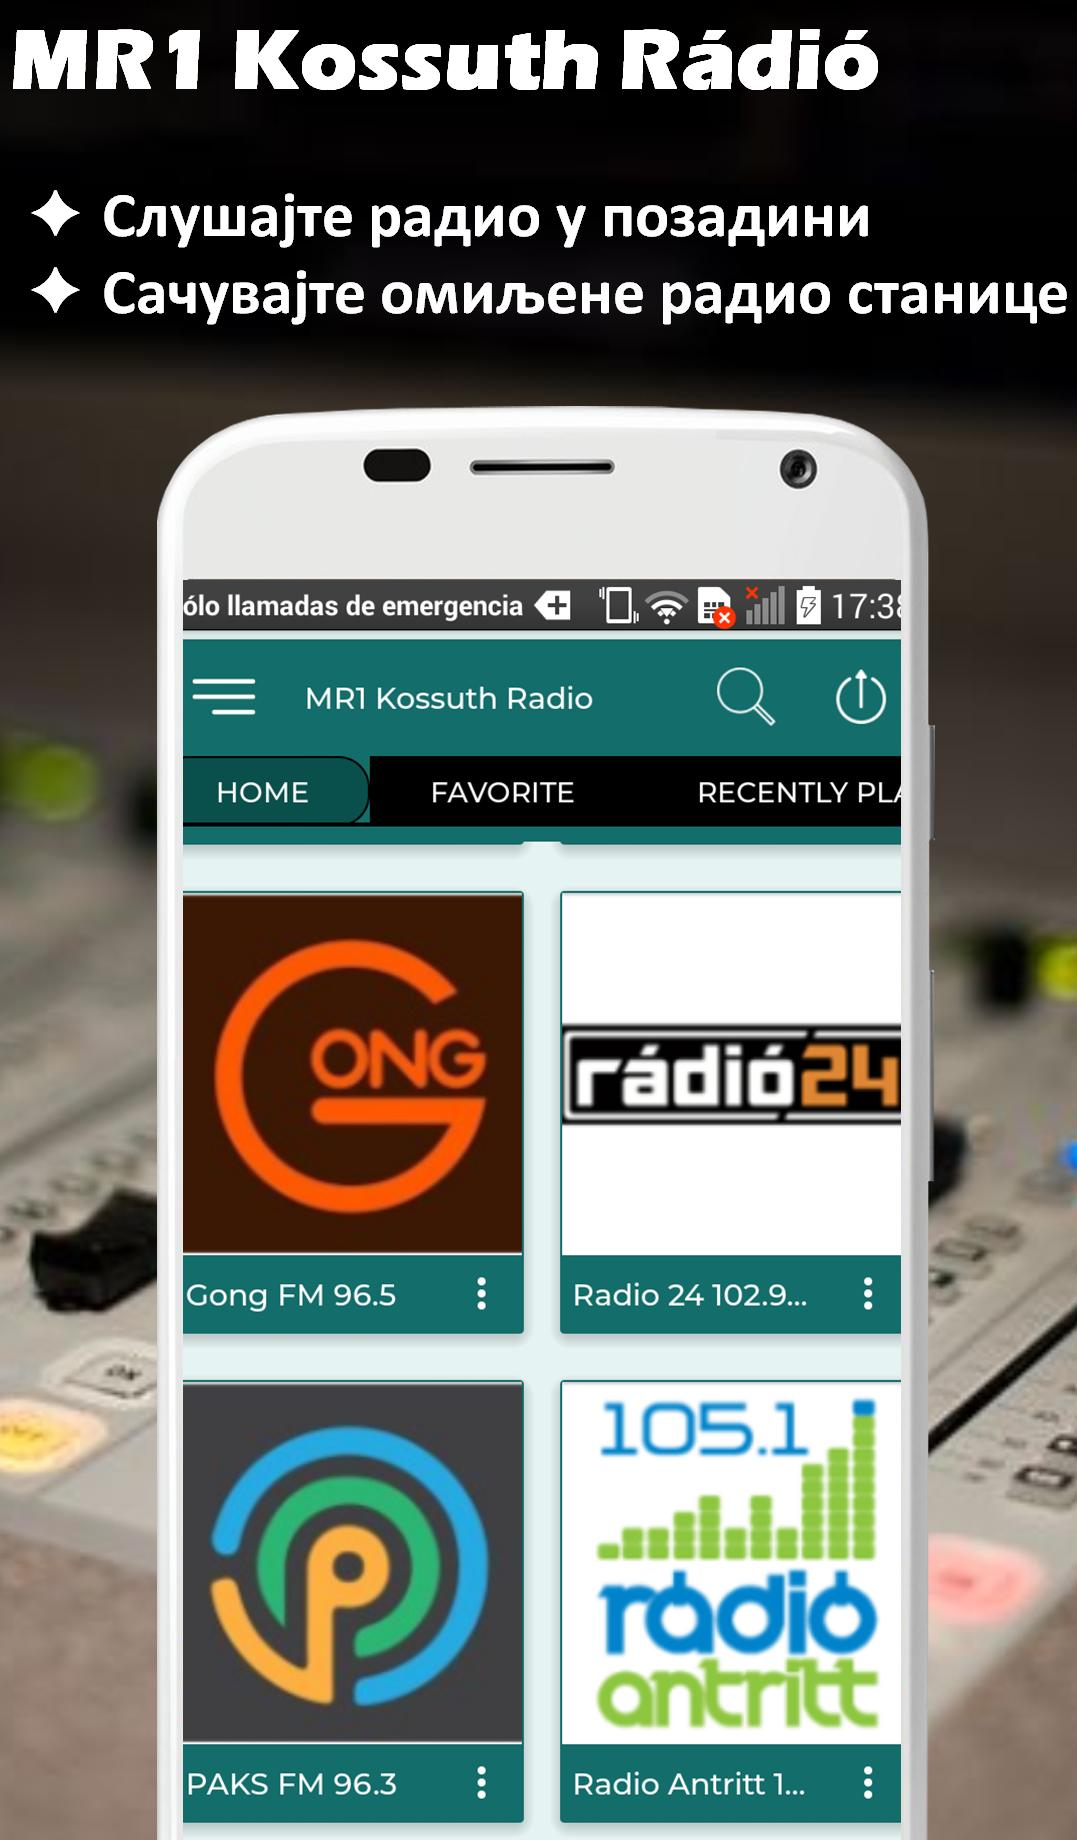 MR1 Kossuth Radio Live Hungary for Android - APK Download